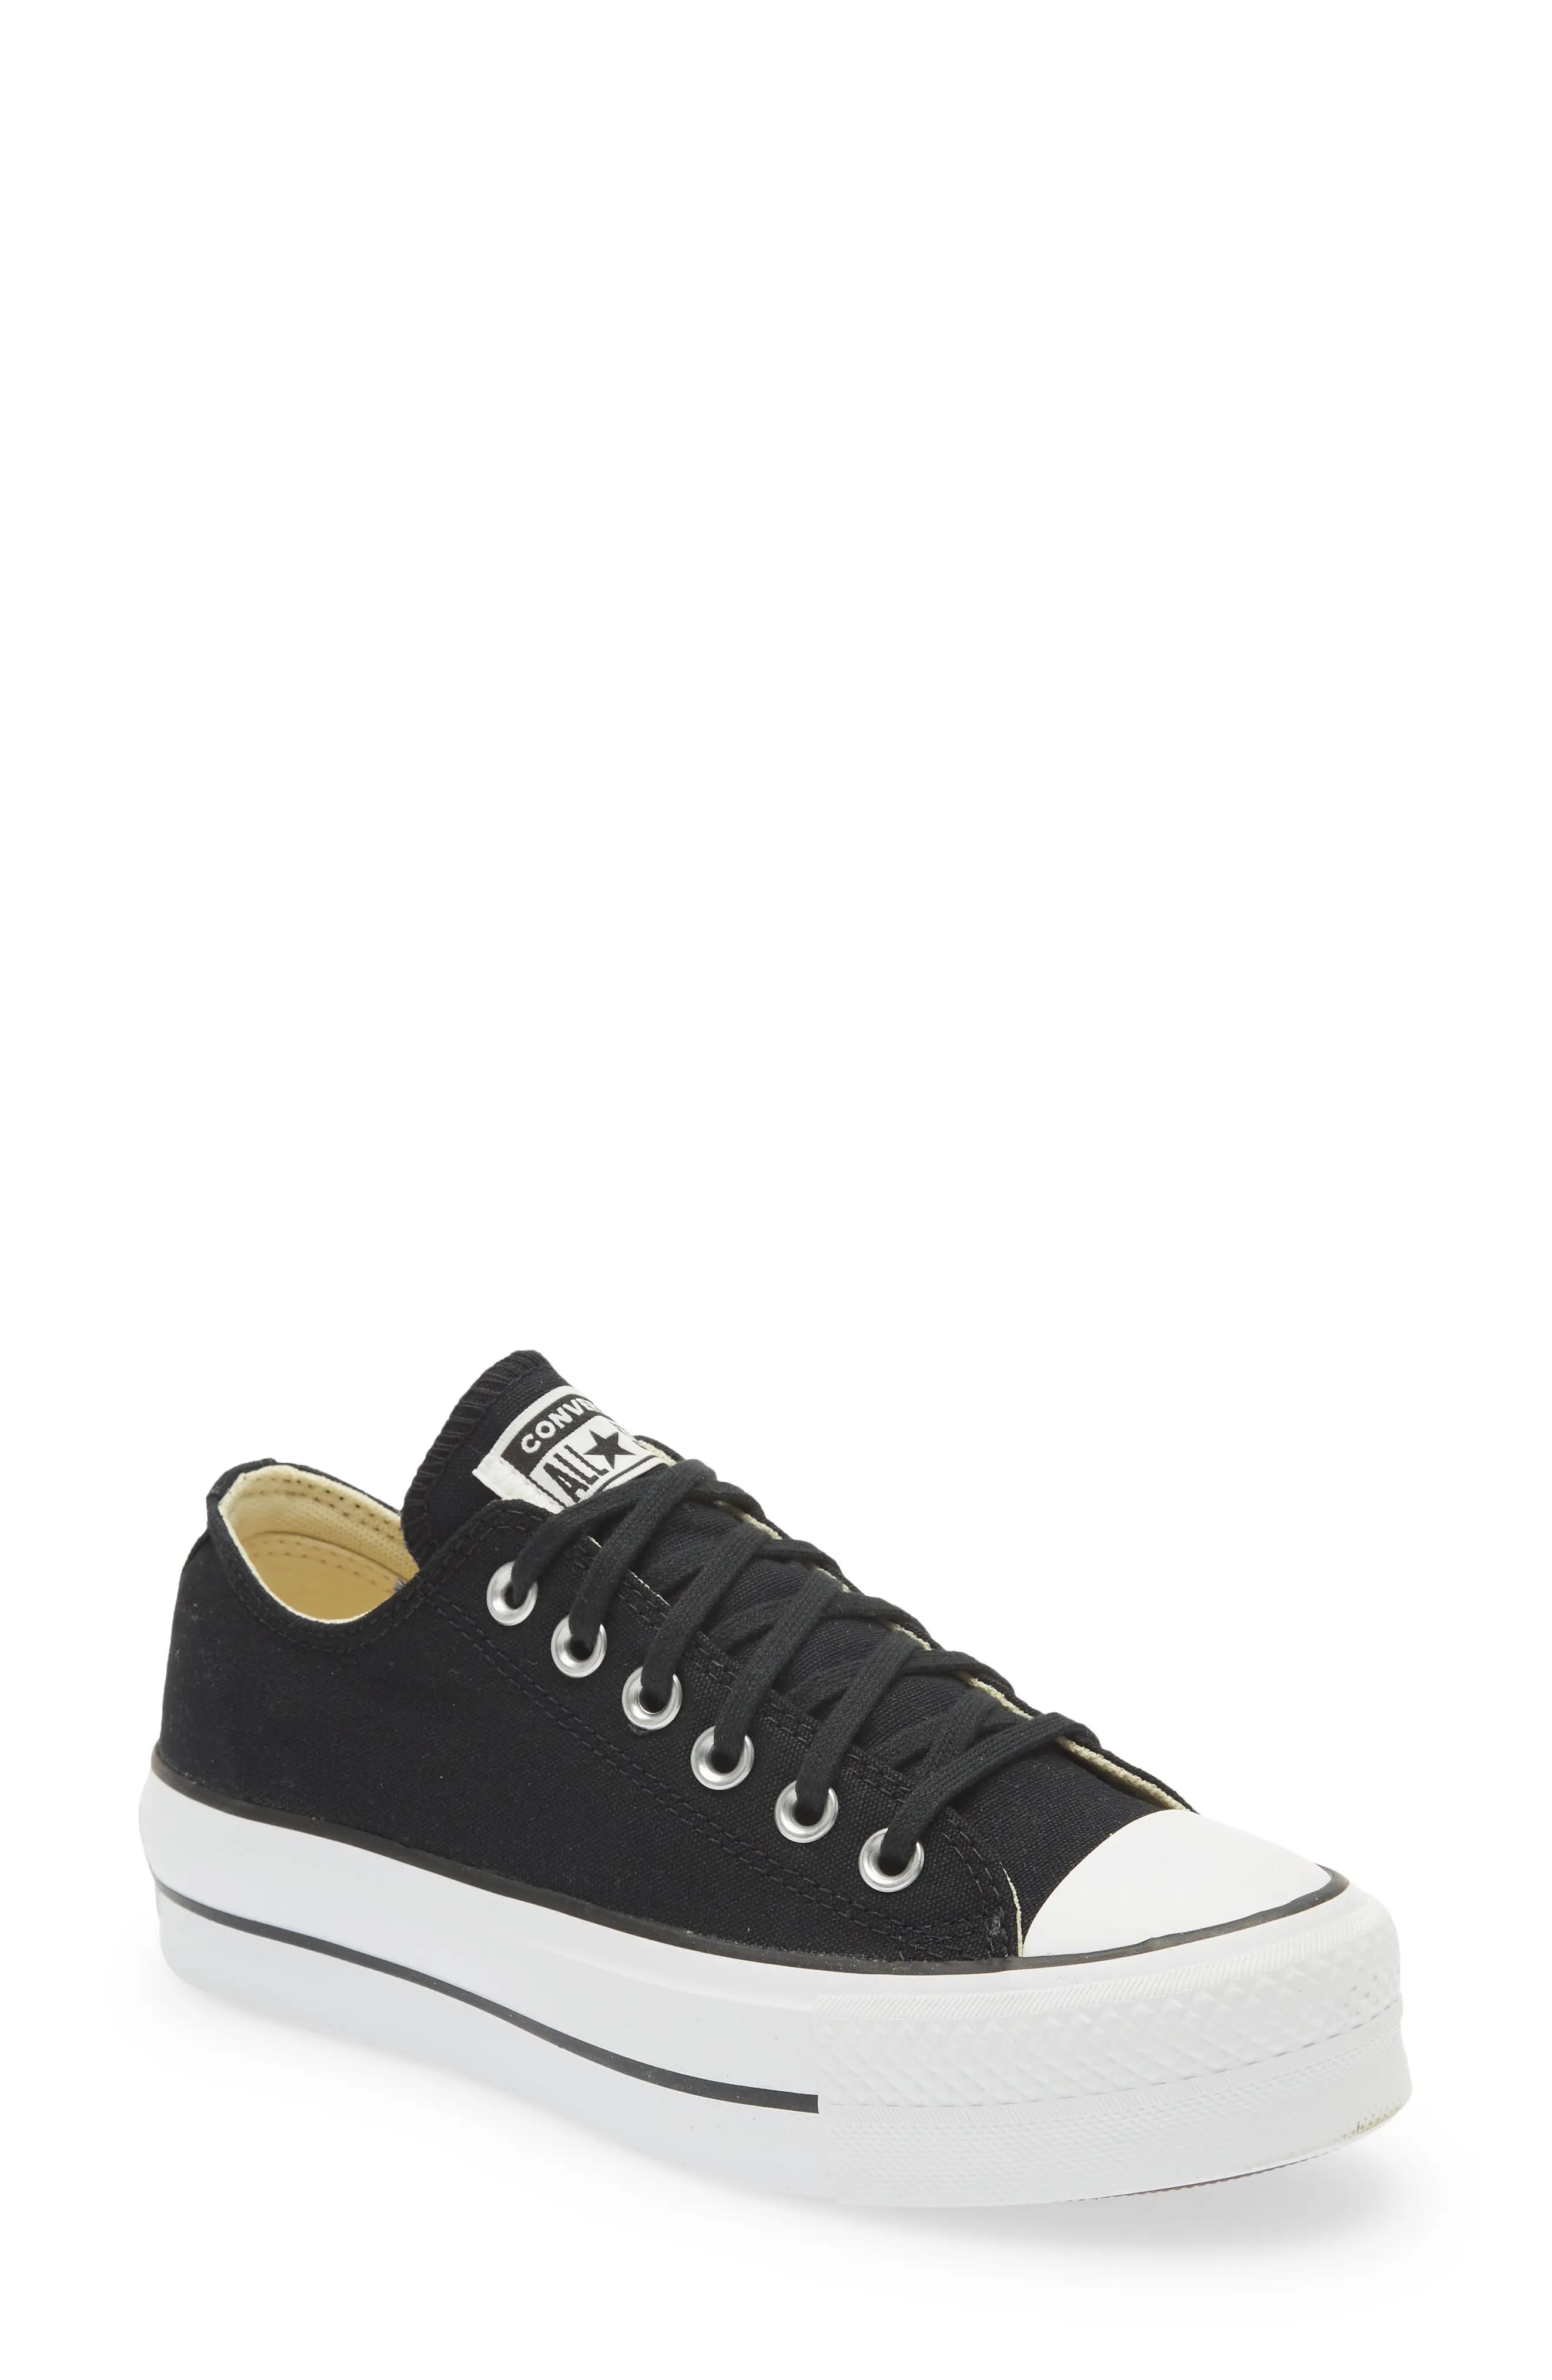 Converse Chuck Taylor(R) All Star(R) Low Top Platform Sneaker in Black/White/White at Nordstrom, Siz | Nordstrom